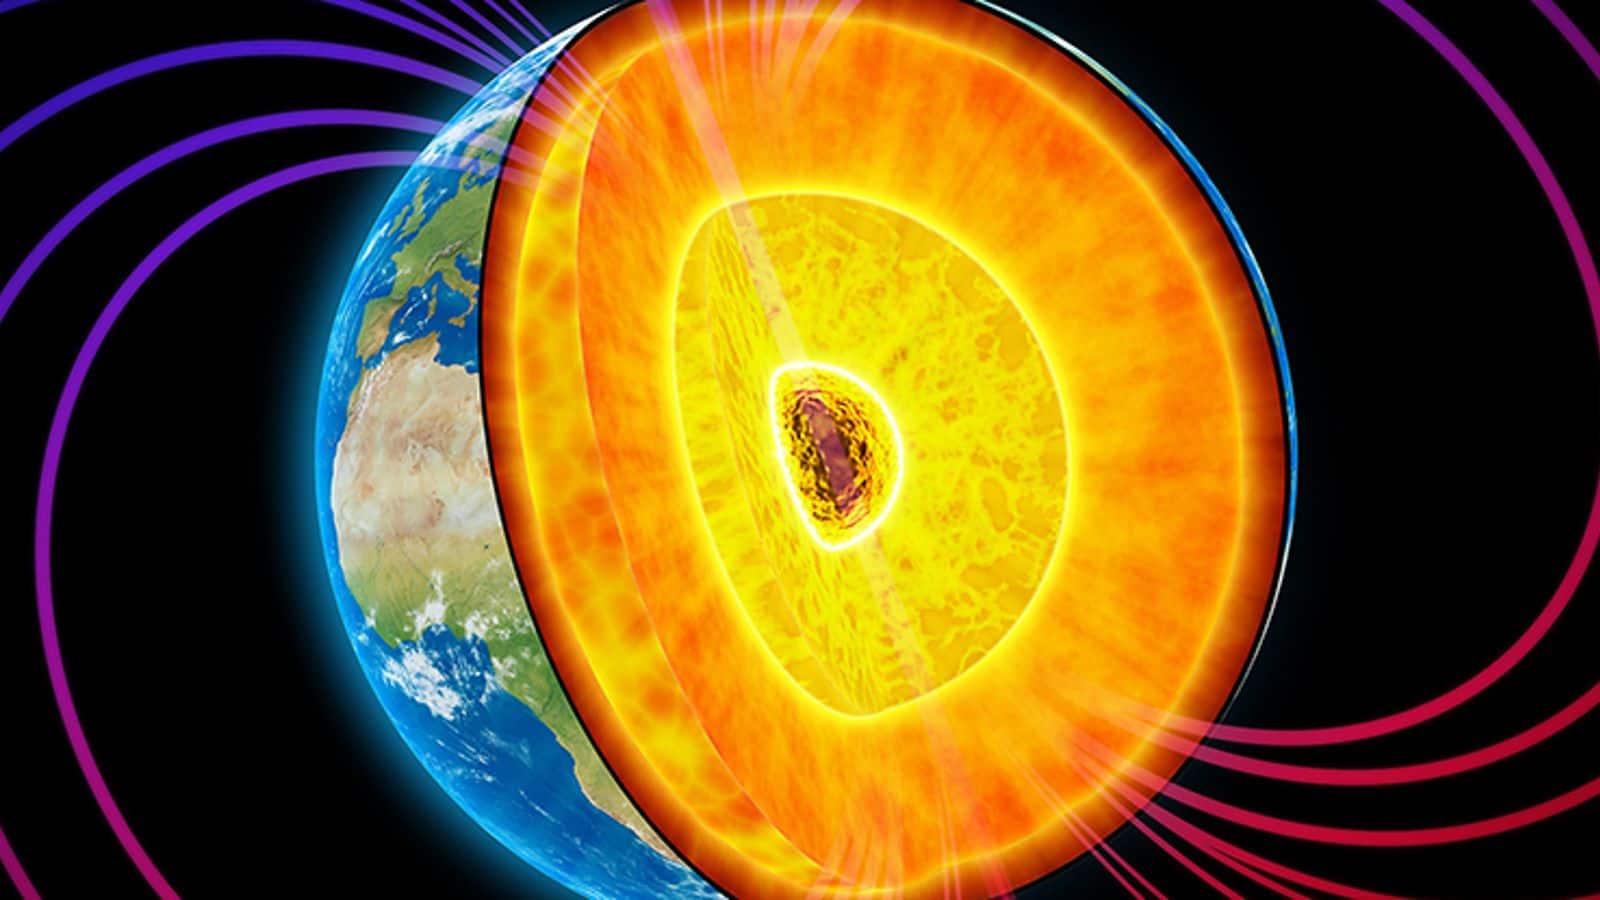 Earth's inner core rotation decelerates for first time in decades